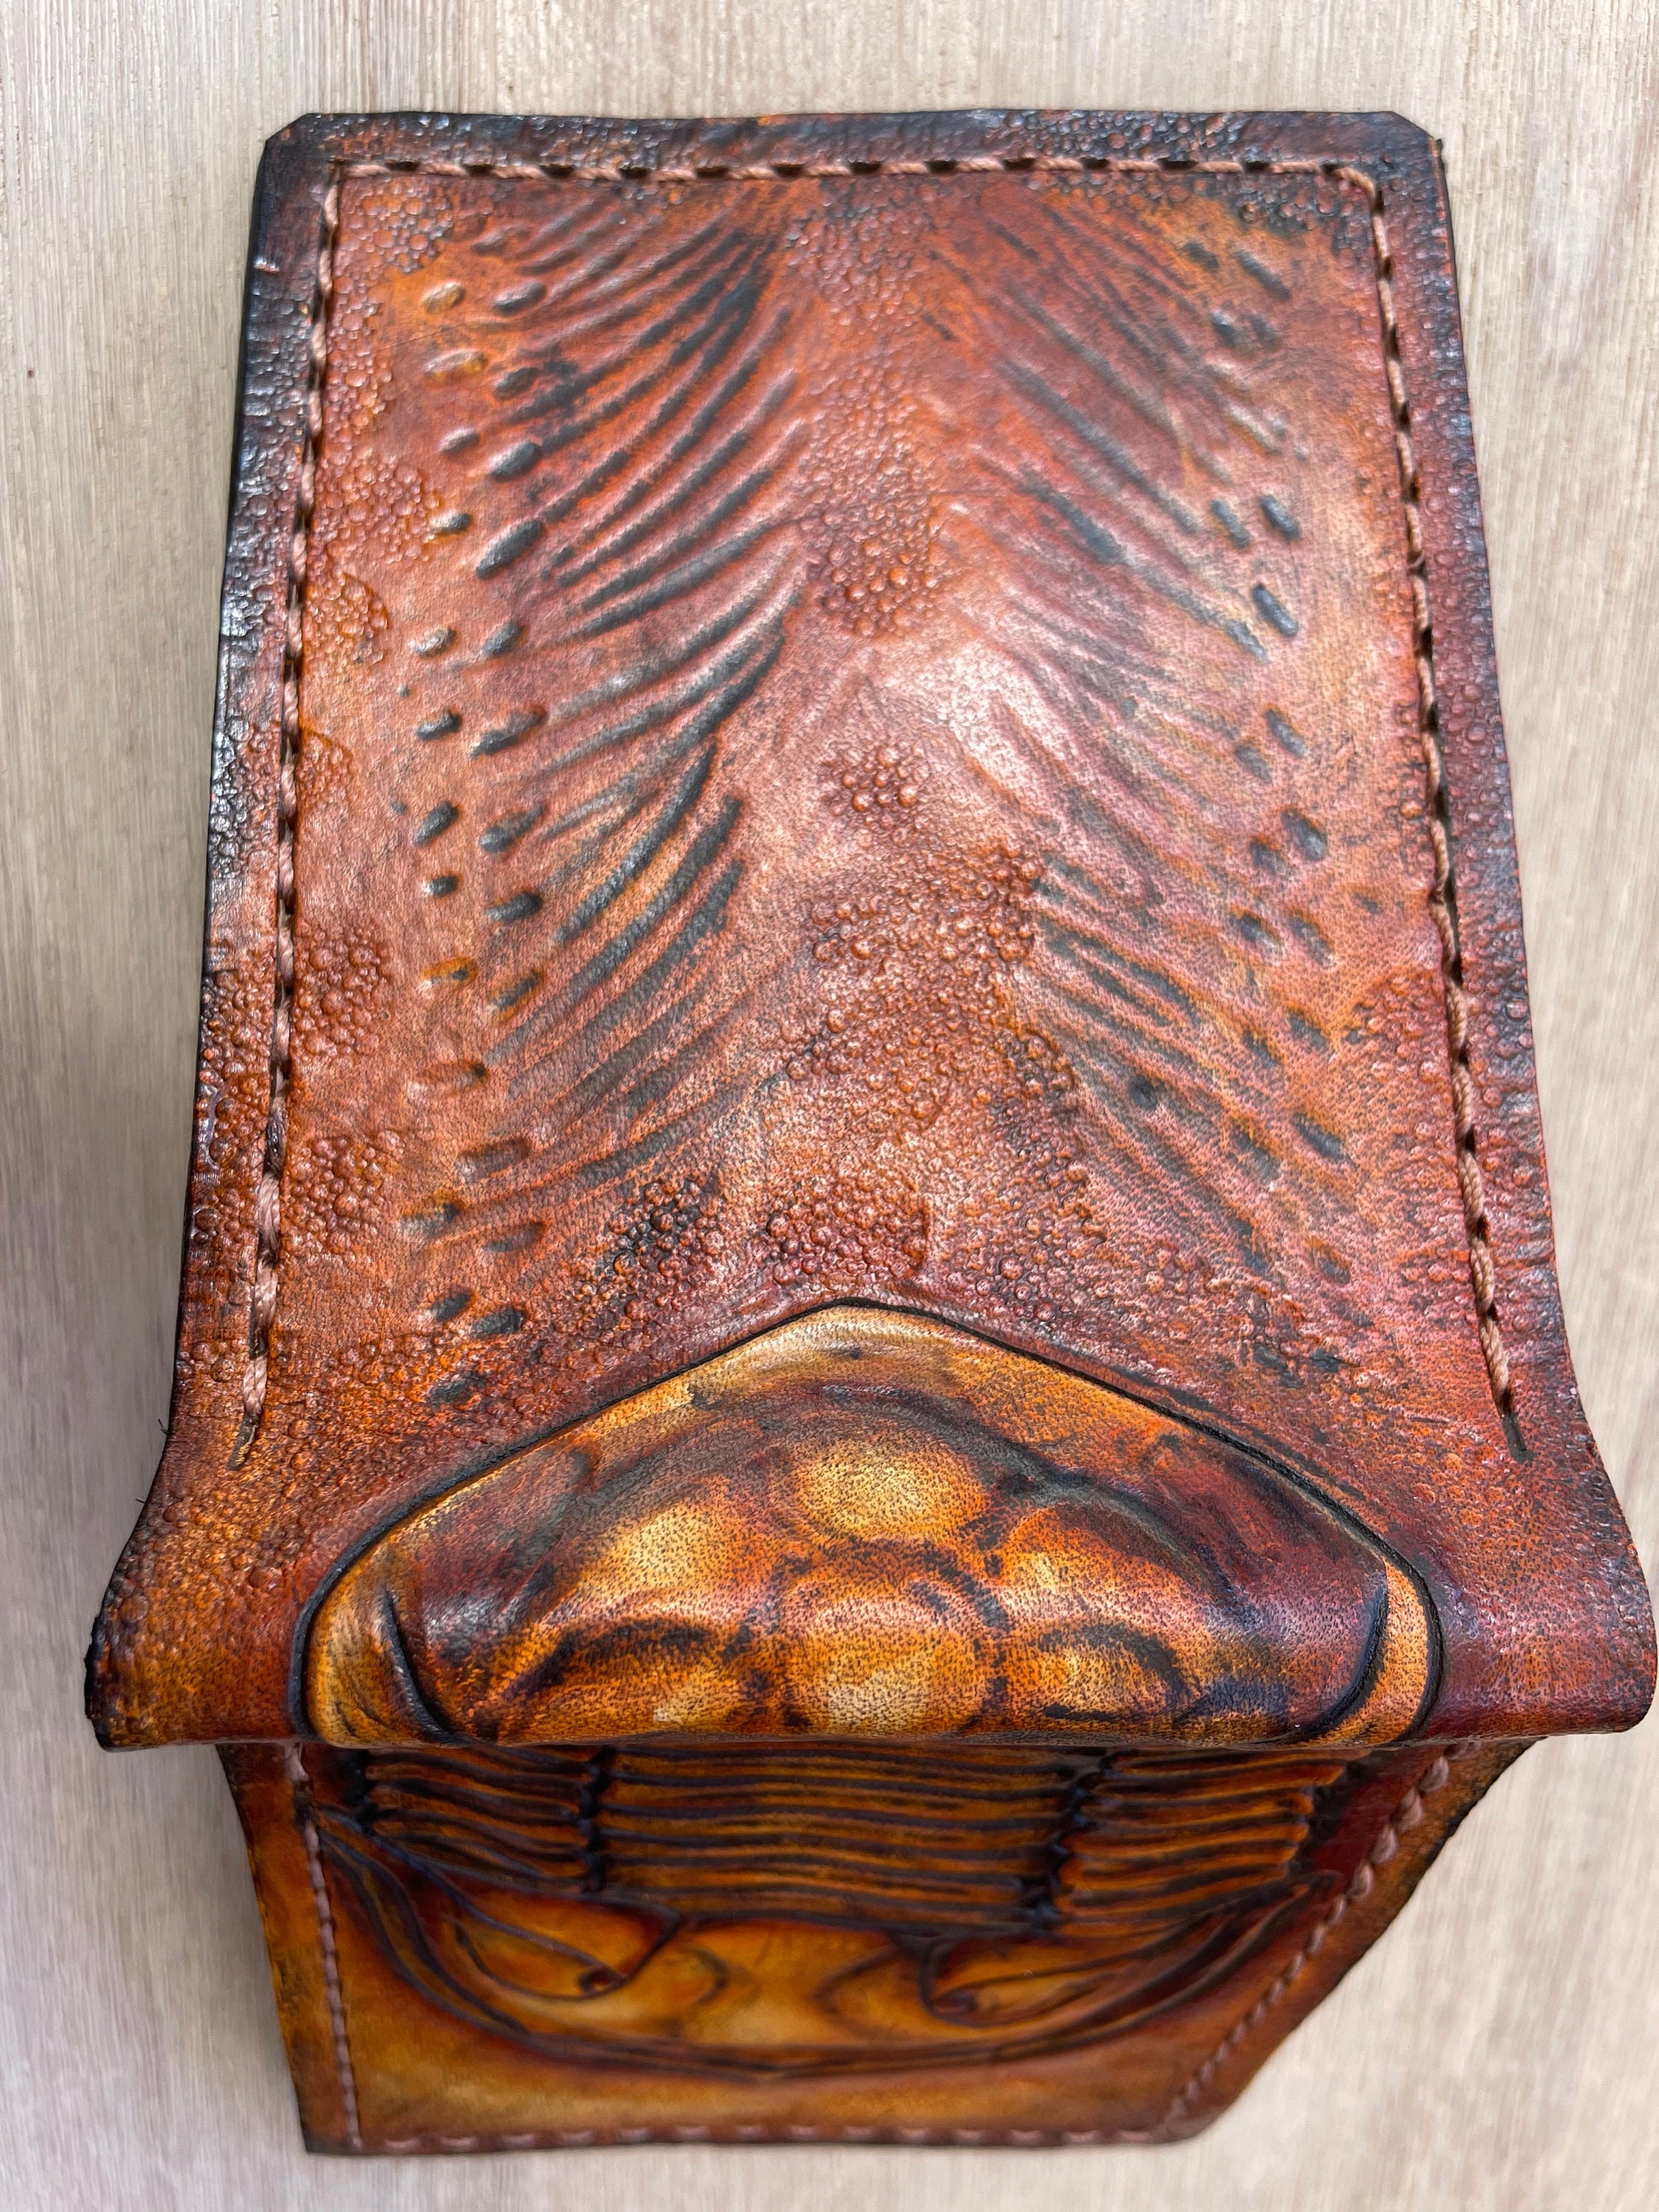 Trilobite Fossil Isotelus Maximus- Leather Bifold Wallet - Handcrafted Wallet -